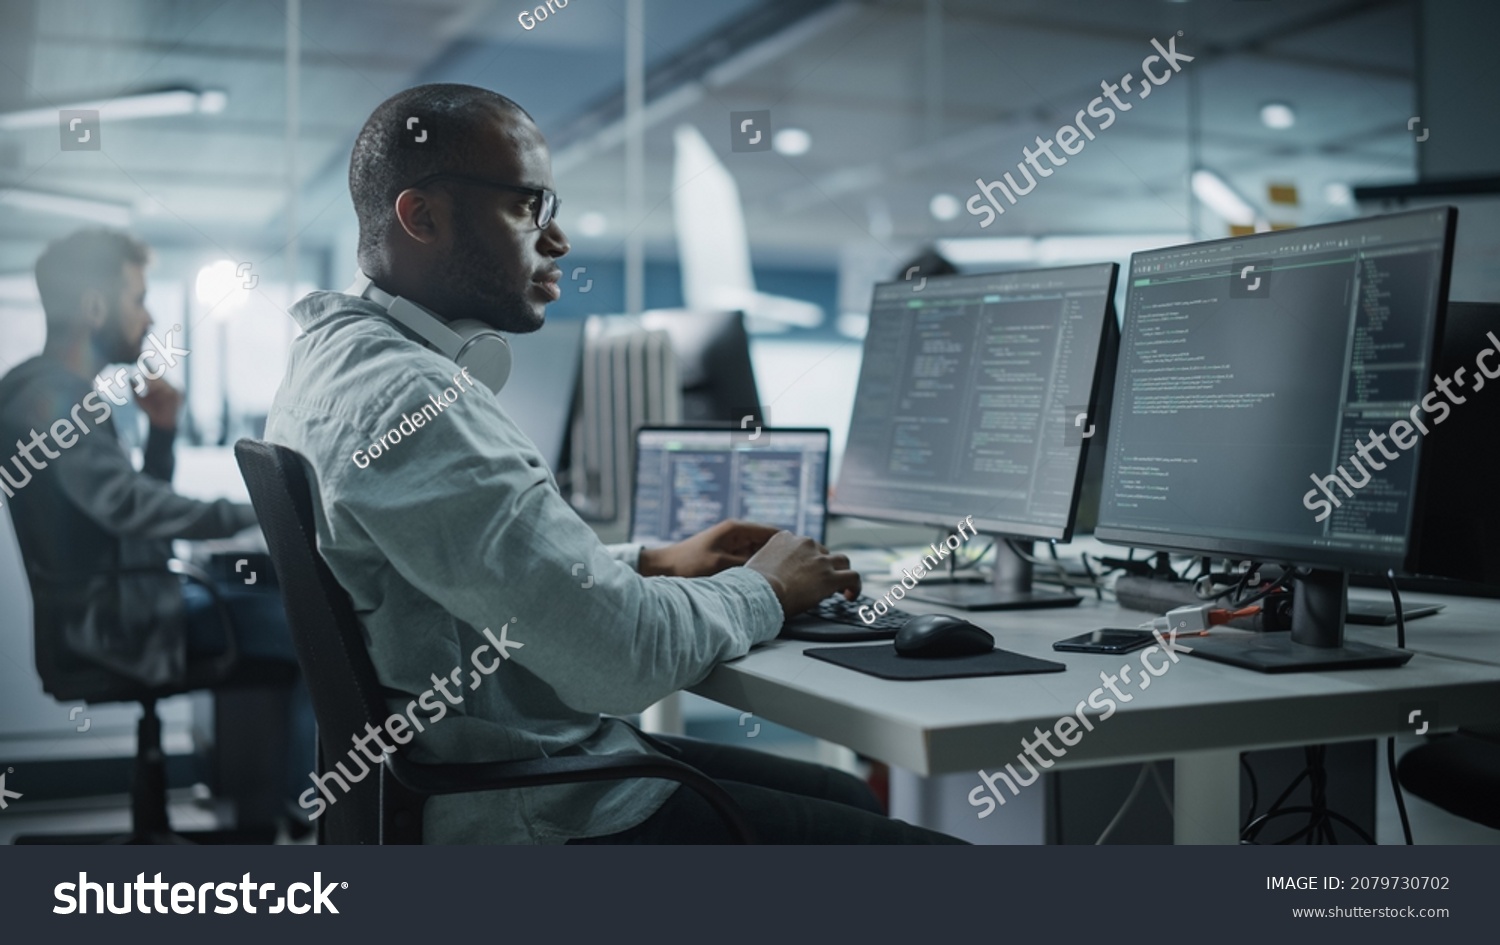 Authentic Office: Enthusiastic Black IT Programmer Starts Working on Desktop Computer. Male Website Developer, Software Engineer Developing App, Video Game. Terminal with Coding Programming Language #2079730702